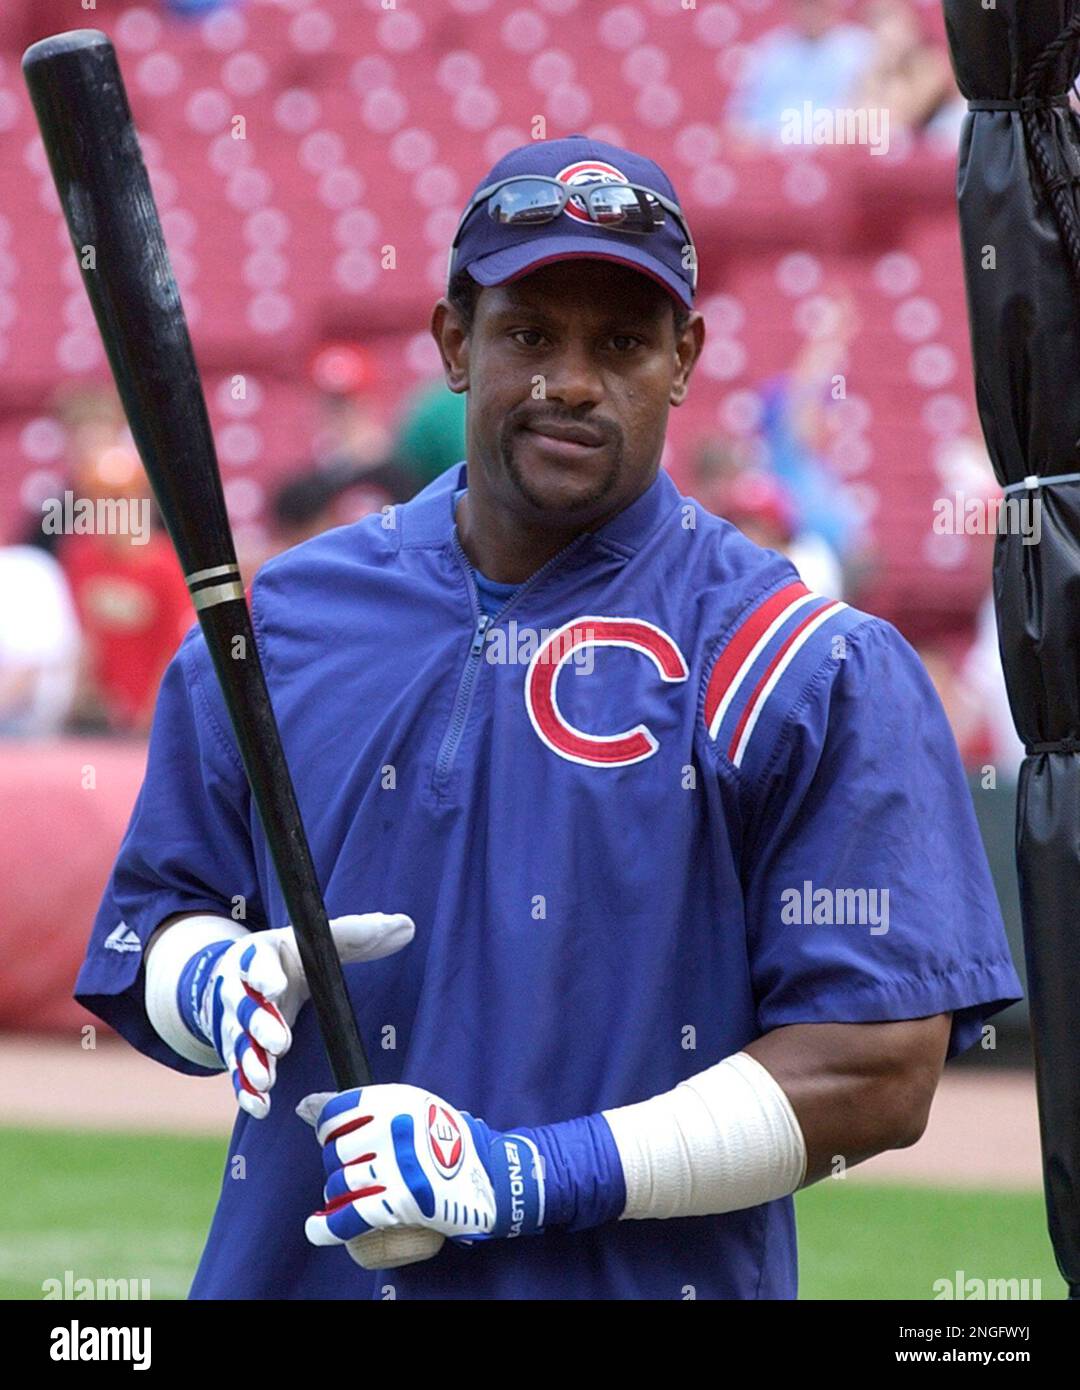 Chicago Cubs' Sammy Sosa takes batting practice, Tuesday, June 17